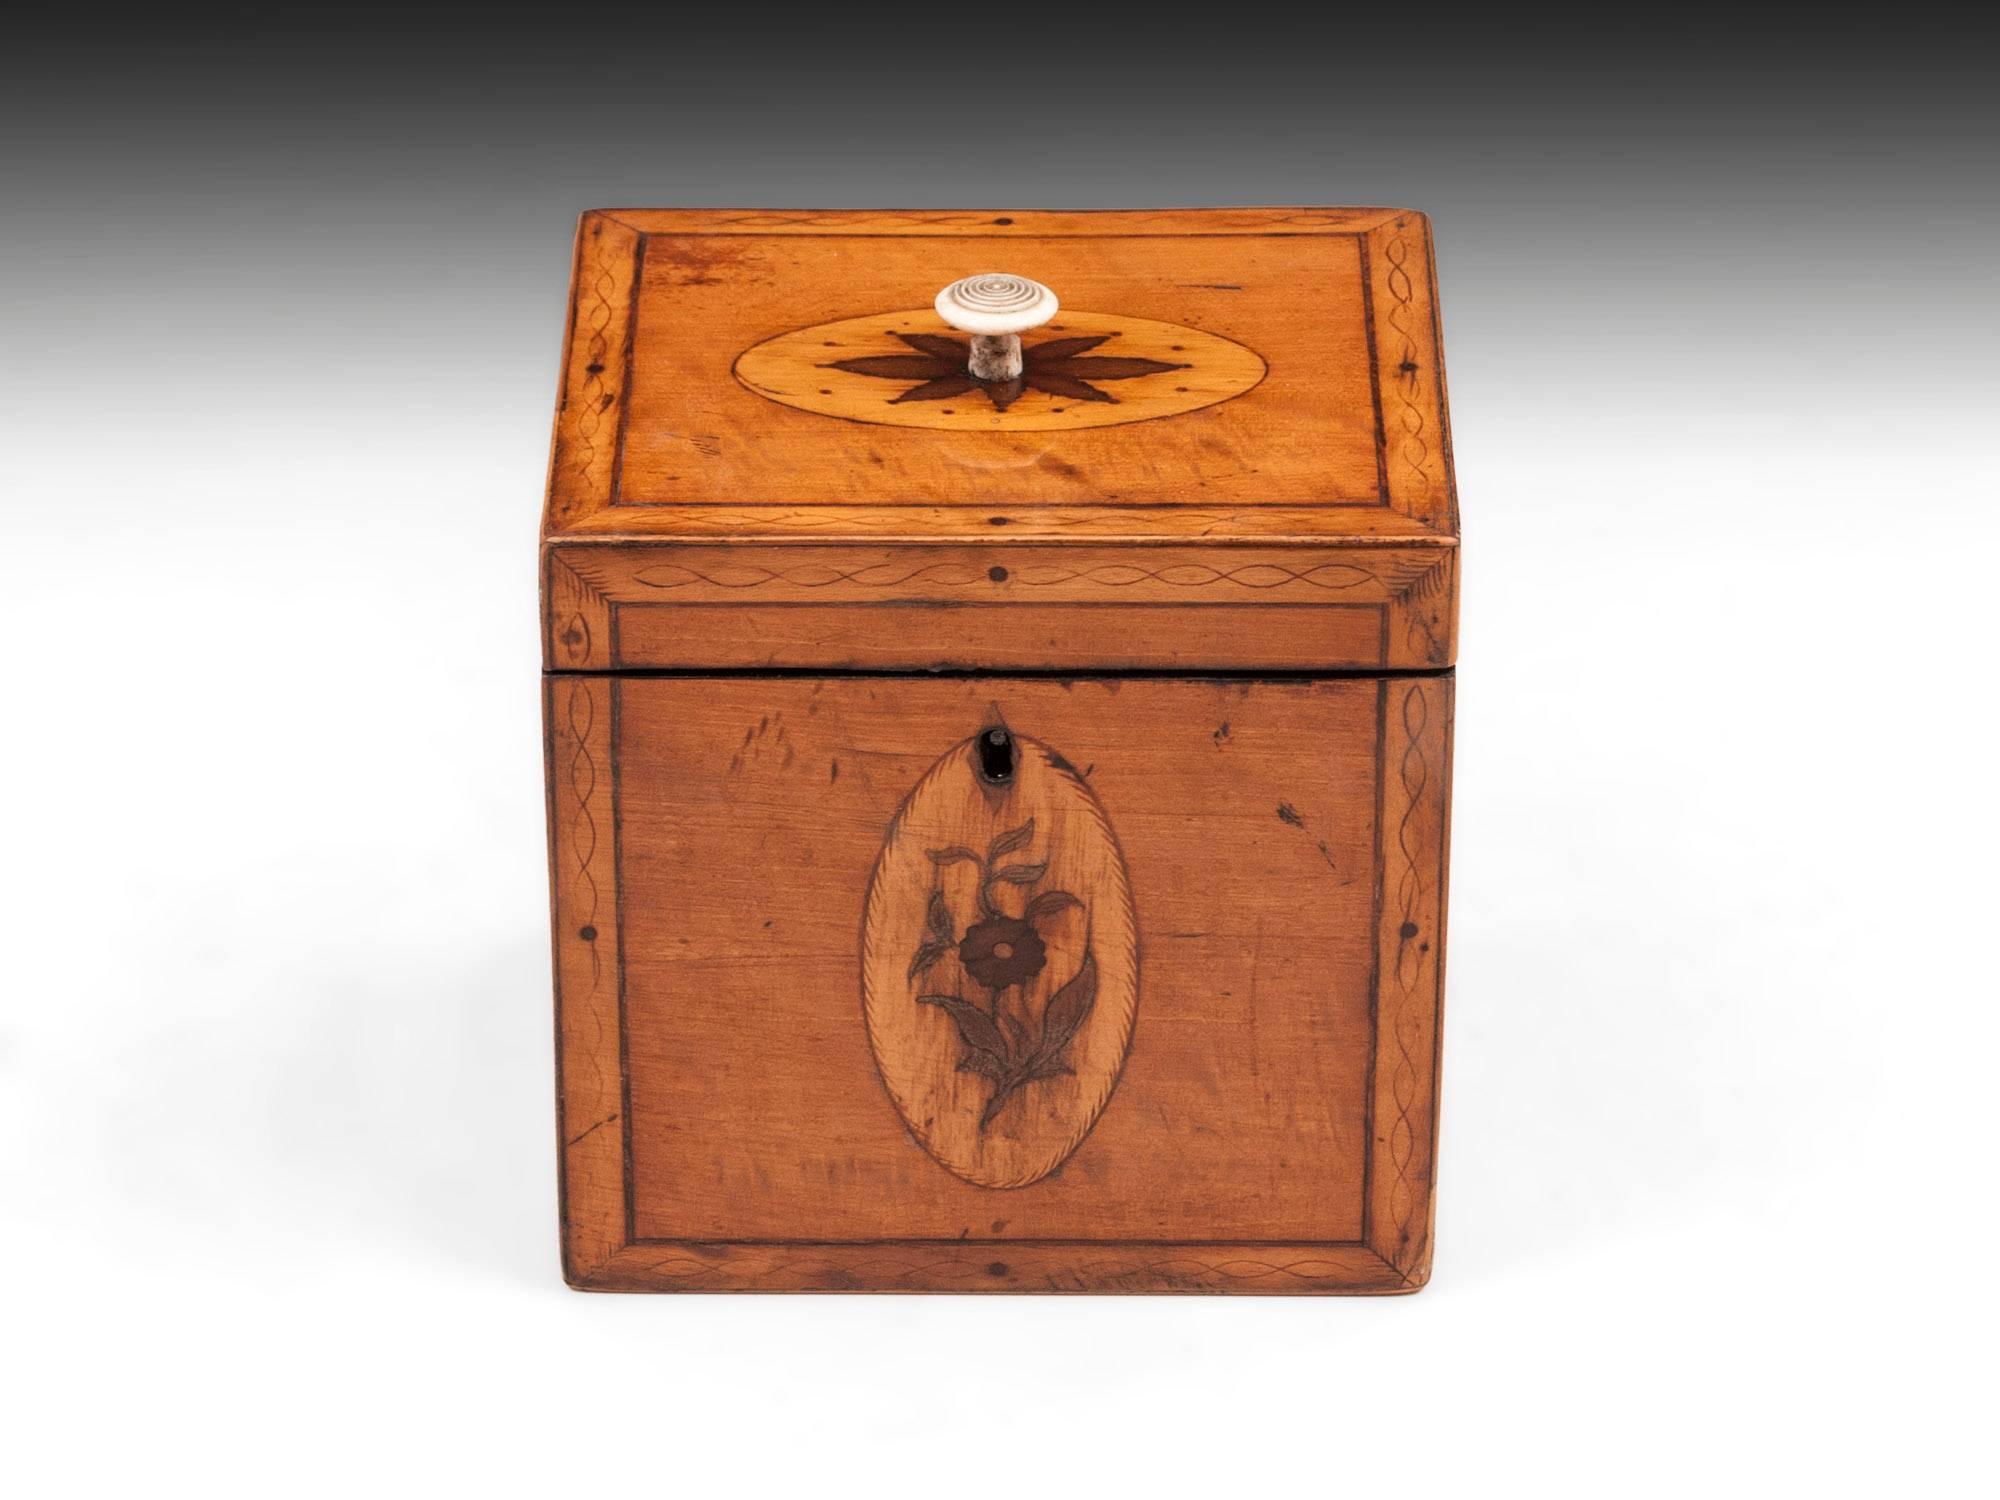 Antique Satinwood tea caddy with decorative engraved penwork borders and floral inlays on all sides. With turned bone handle to the lid. 

The Georgian single tea caddy interior features a matched bone handle mahogany lid and contains 95% of its